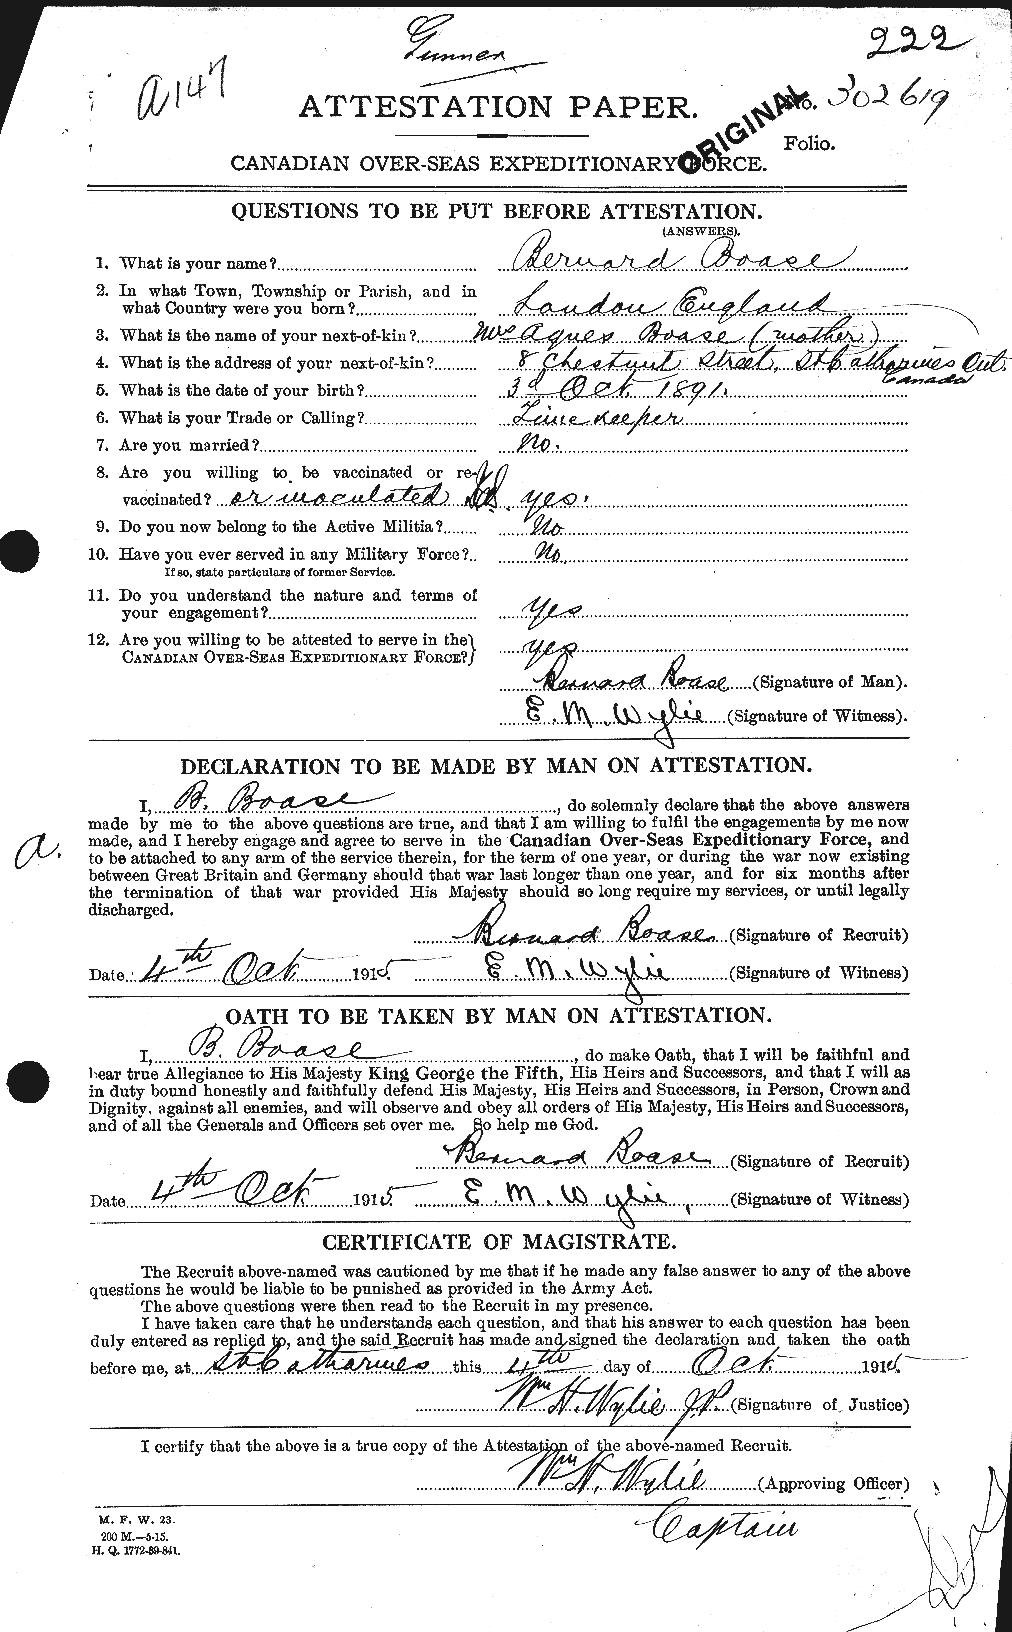 Personnel Records of the First World War - CEF 247250a